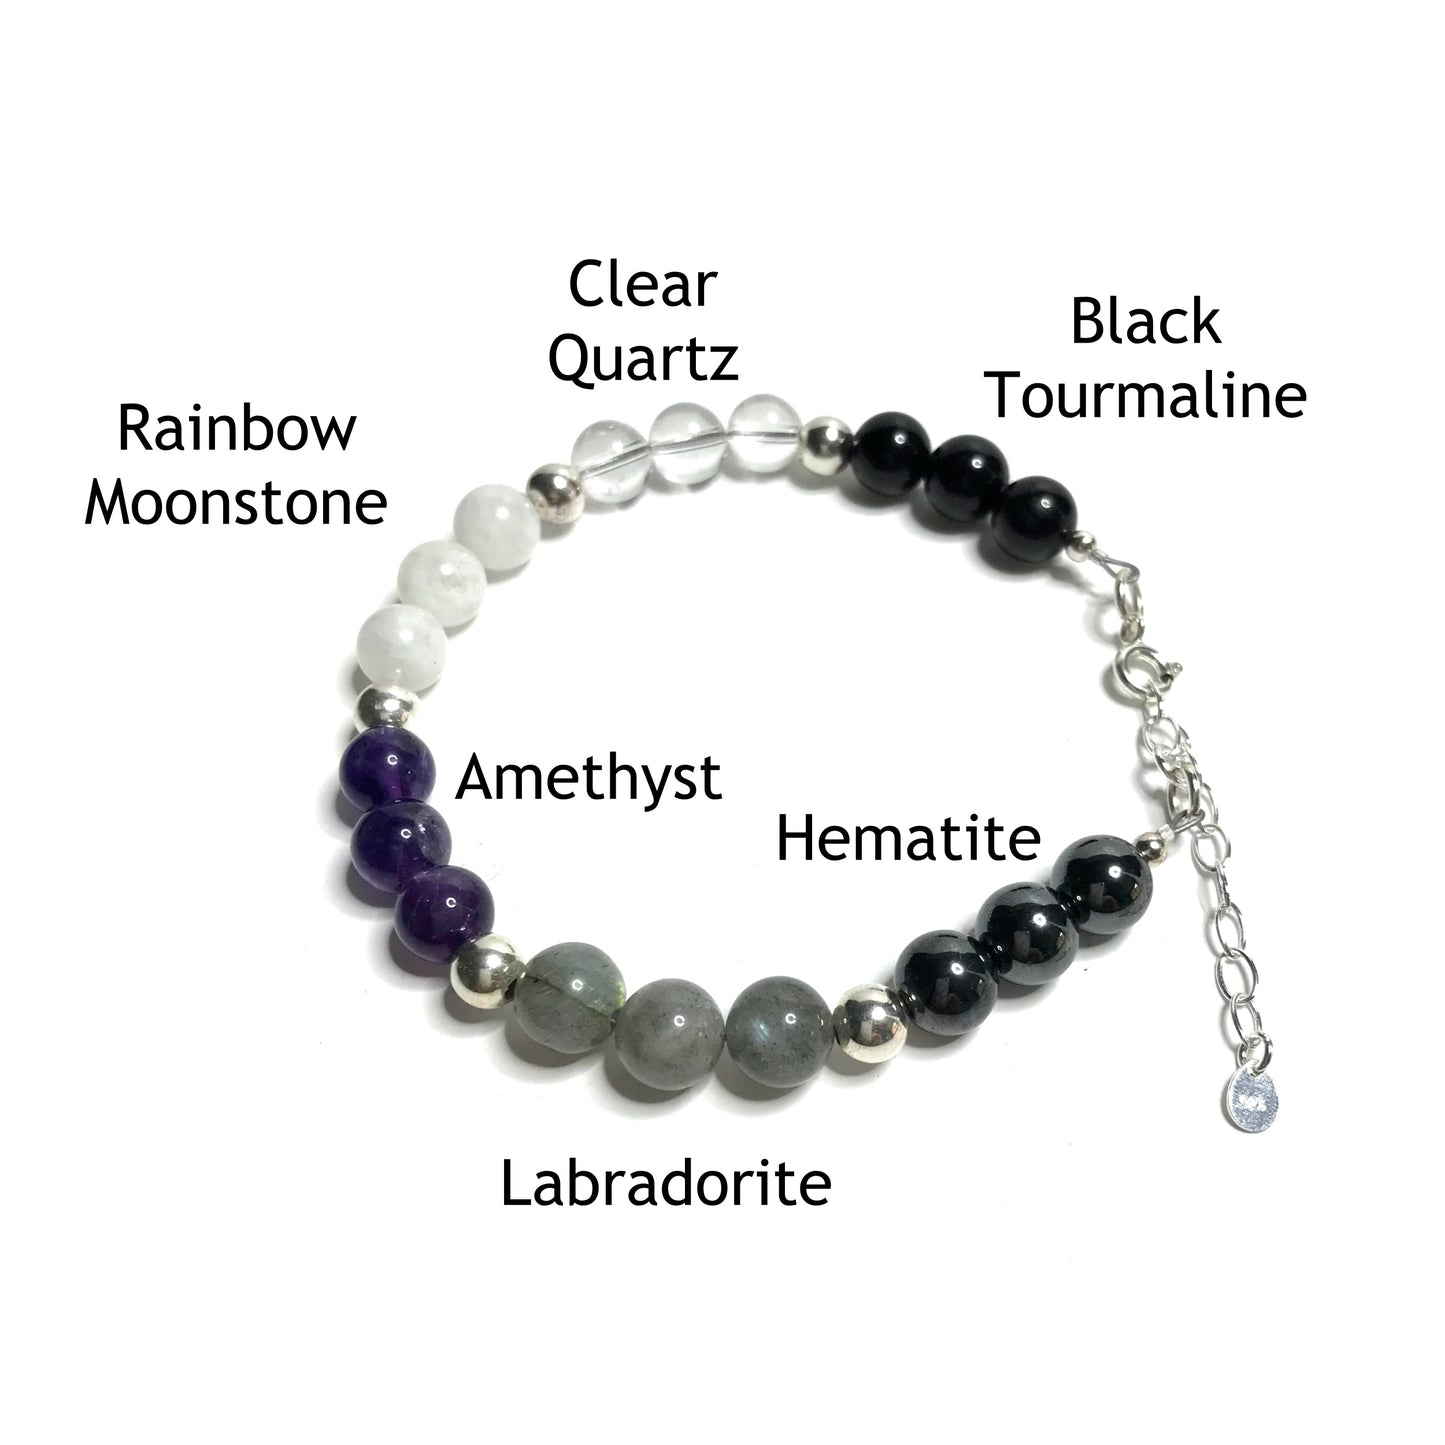 Empath protection bracelet with the beads labelled as black tourmaline, clear quartz, rainbow moonstone, amethyst, labradorite and hematite